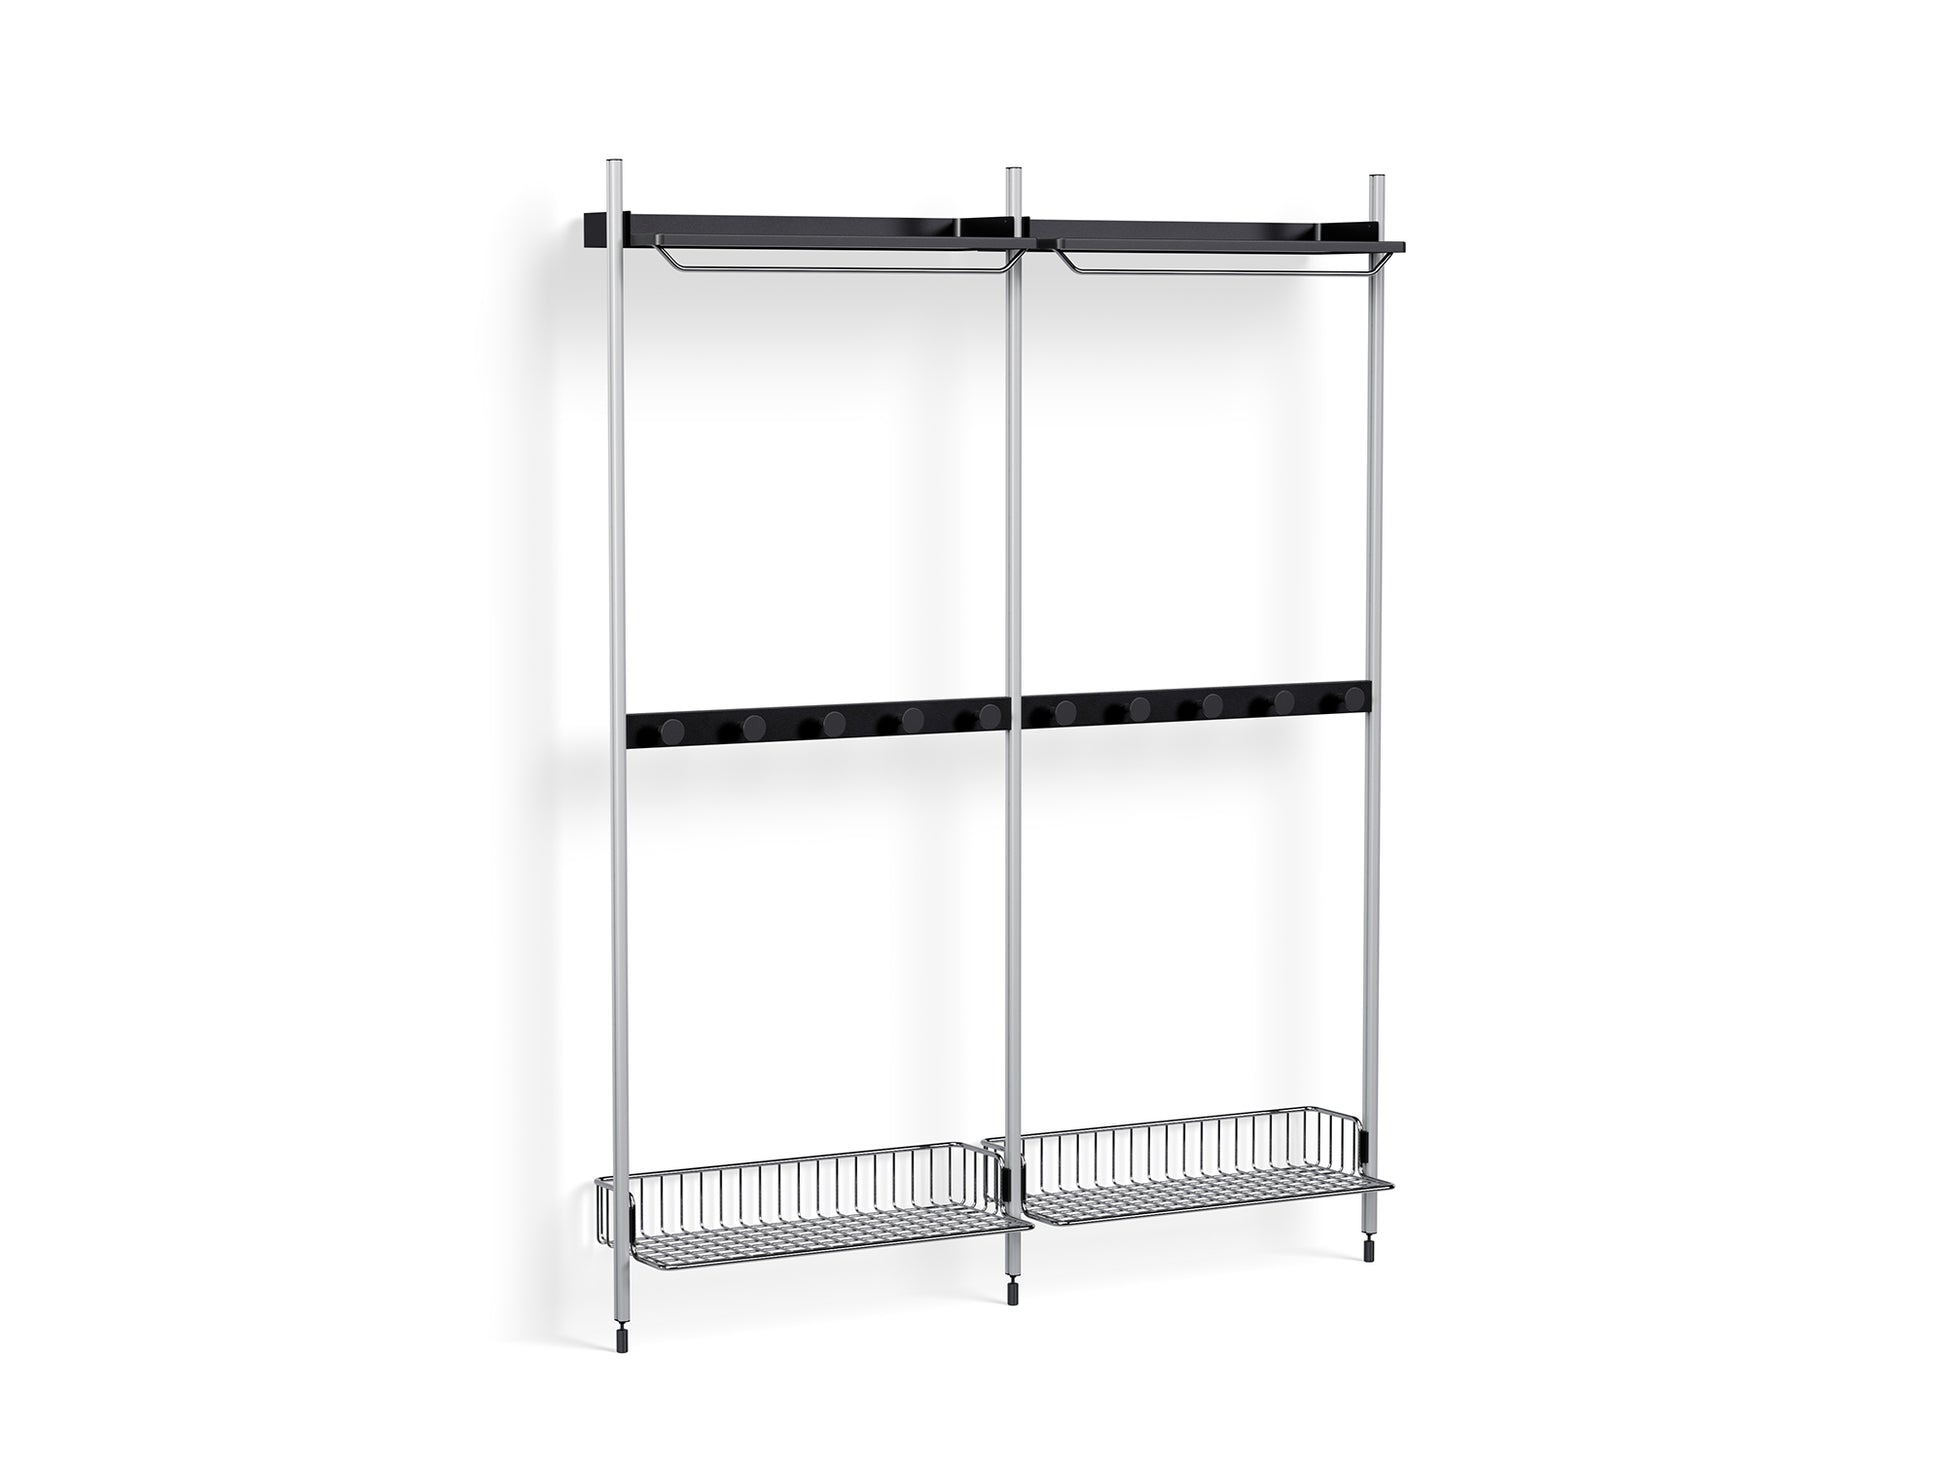 Pier System 1042 by HAY - Clear Anodised Aluminium Uprights /PS Black with Chromed Wire Shelf